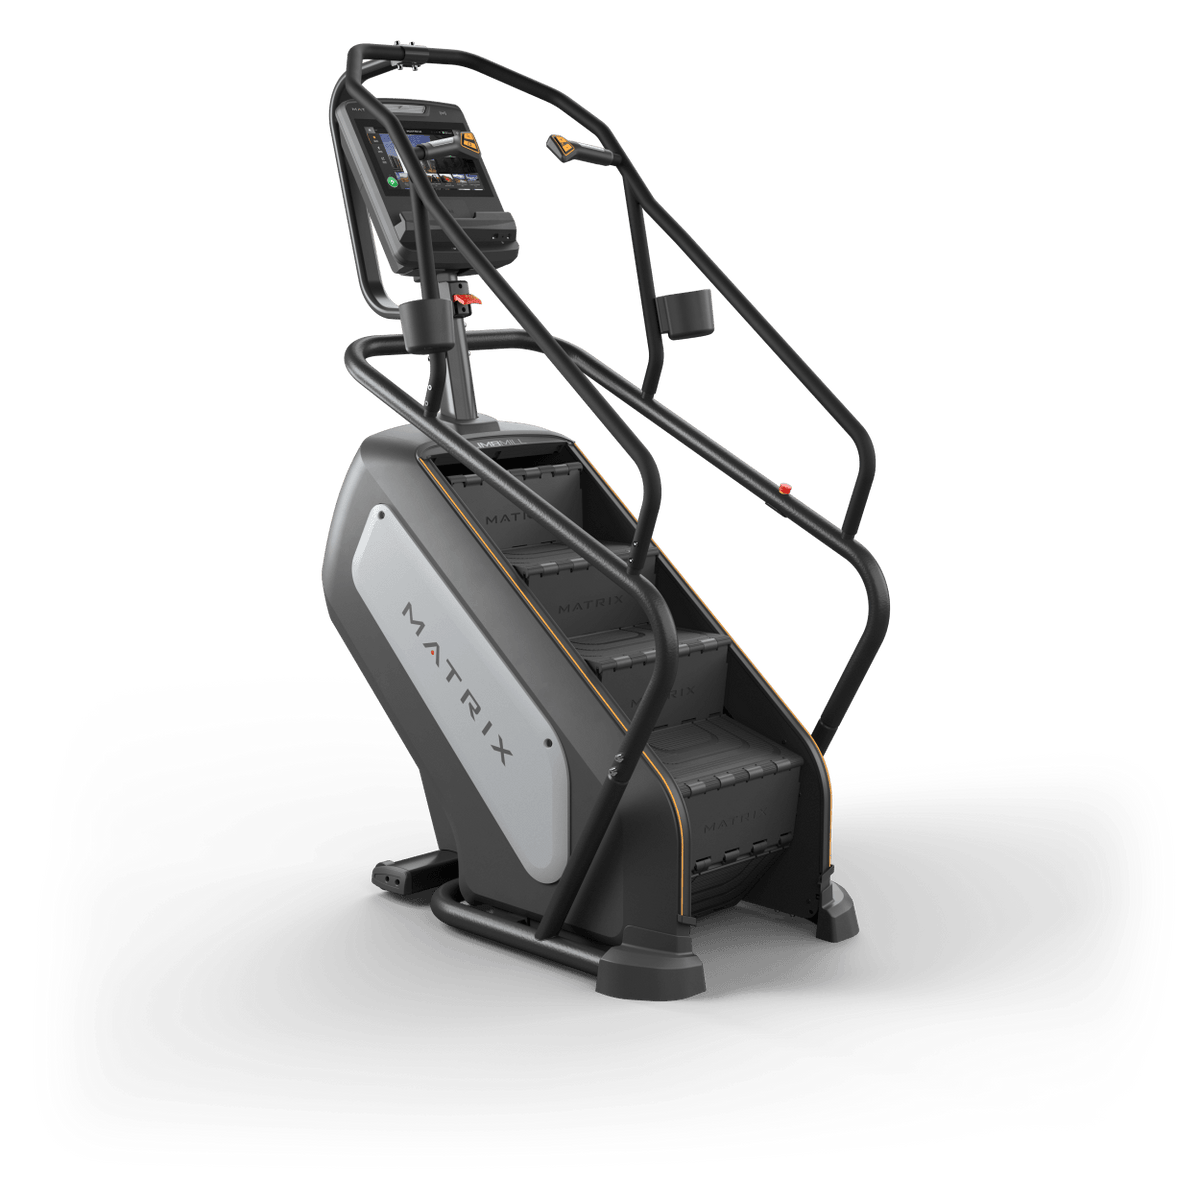 Matrix Fitness Endurance Climbmill with Touch Console full view | Fitness Experience